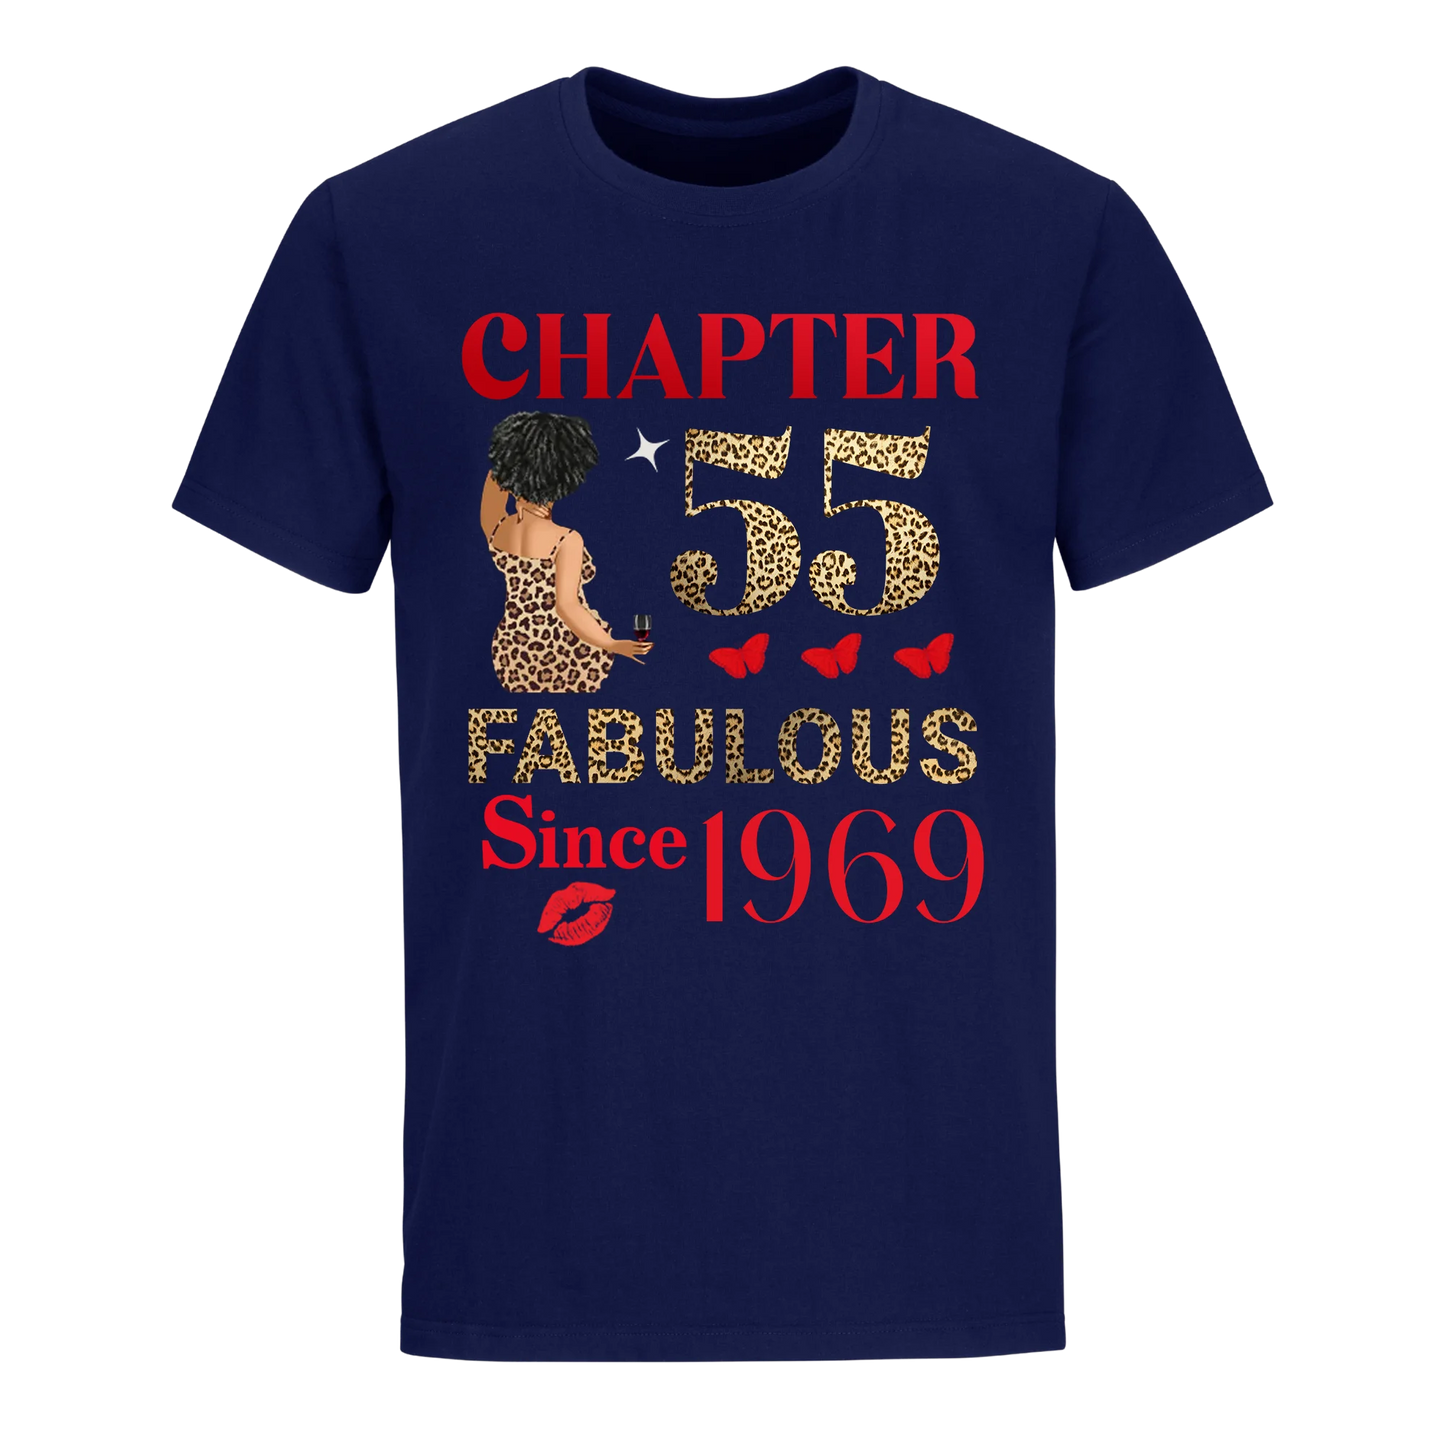 CHAPTER 55TH FAB SINCE 1969 UNISEX SHIRT